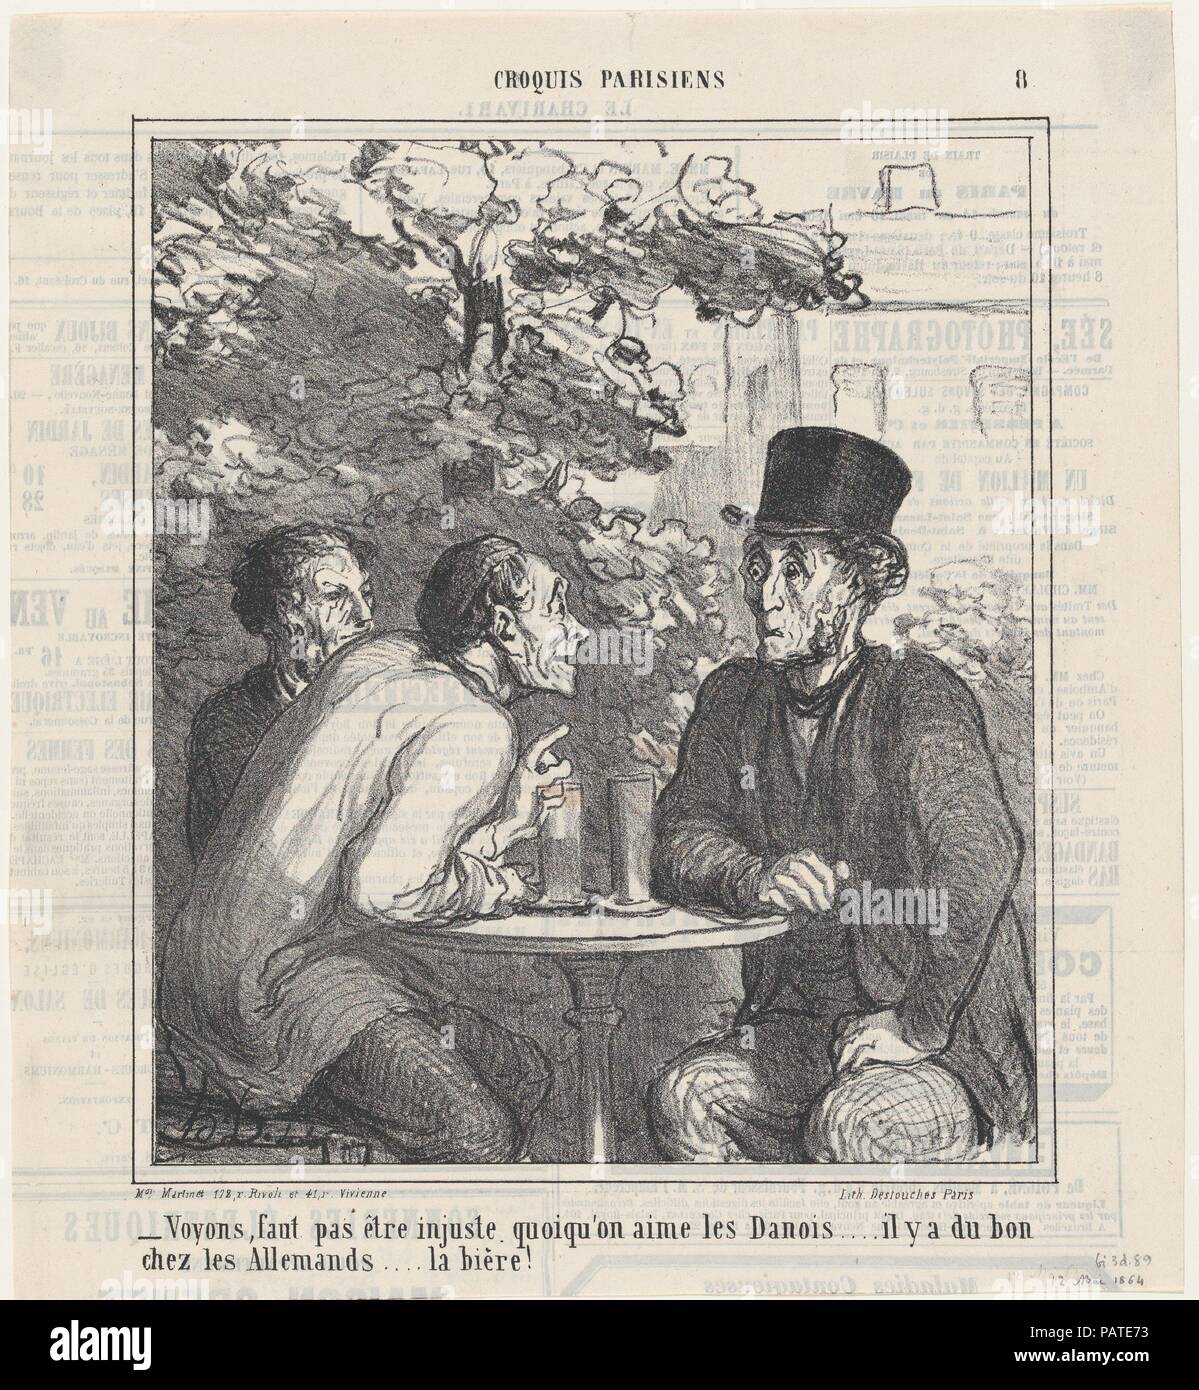 We shouldn't be unfair..., from 'Parisian sketches,' published in Le Charivari, May 12, 1864. Artist: Honoré Daumier (French, Marseilles 1808-1879 Valmondois). Dimensions: Image: 9 3/8 × 8 1/8 in. (23.8 × 20.6 cm)  Sheet: 11 3/4 × 10 3/4 in. (29.8 × 27.3 cm). Printer: Destouches (Paris). Publisher: Aaron Martinet (French, 1762-1841). Series/Portfolio: 'Parisian sketches' (Croquis Parisiens). Date: May 12, 1864.  We shouldn't be unfair. One may like the Danes... but let's not forget that the Germans also have something good... their beer!. Museum: Metropolitan Museum of Art, New York, USA. Stock Photo